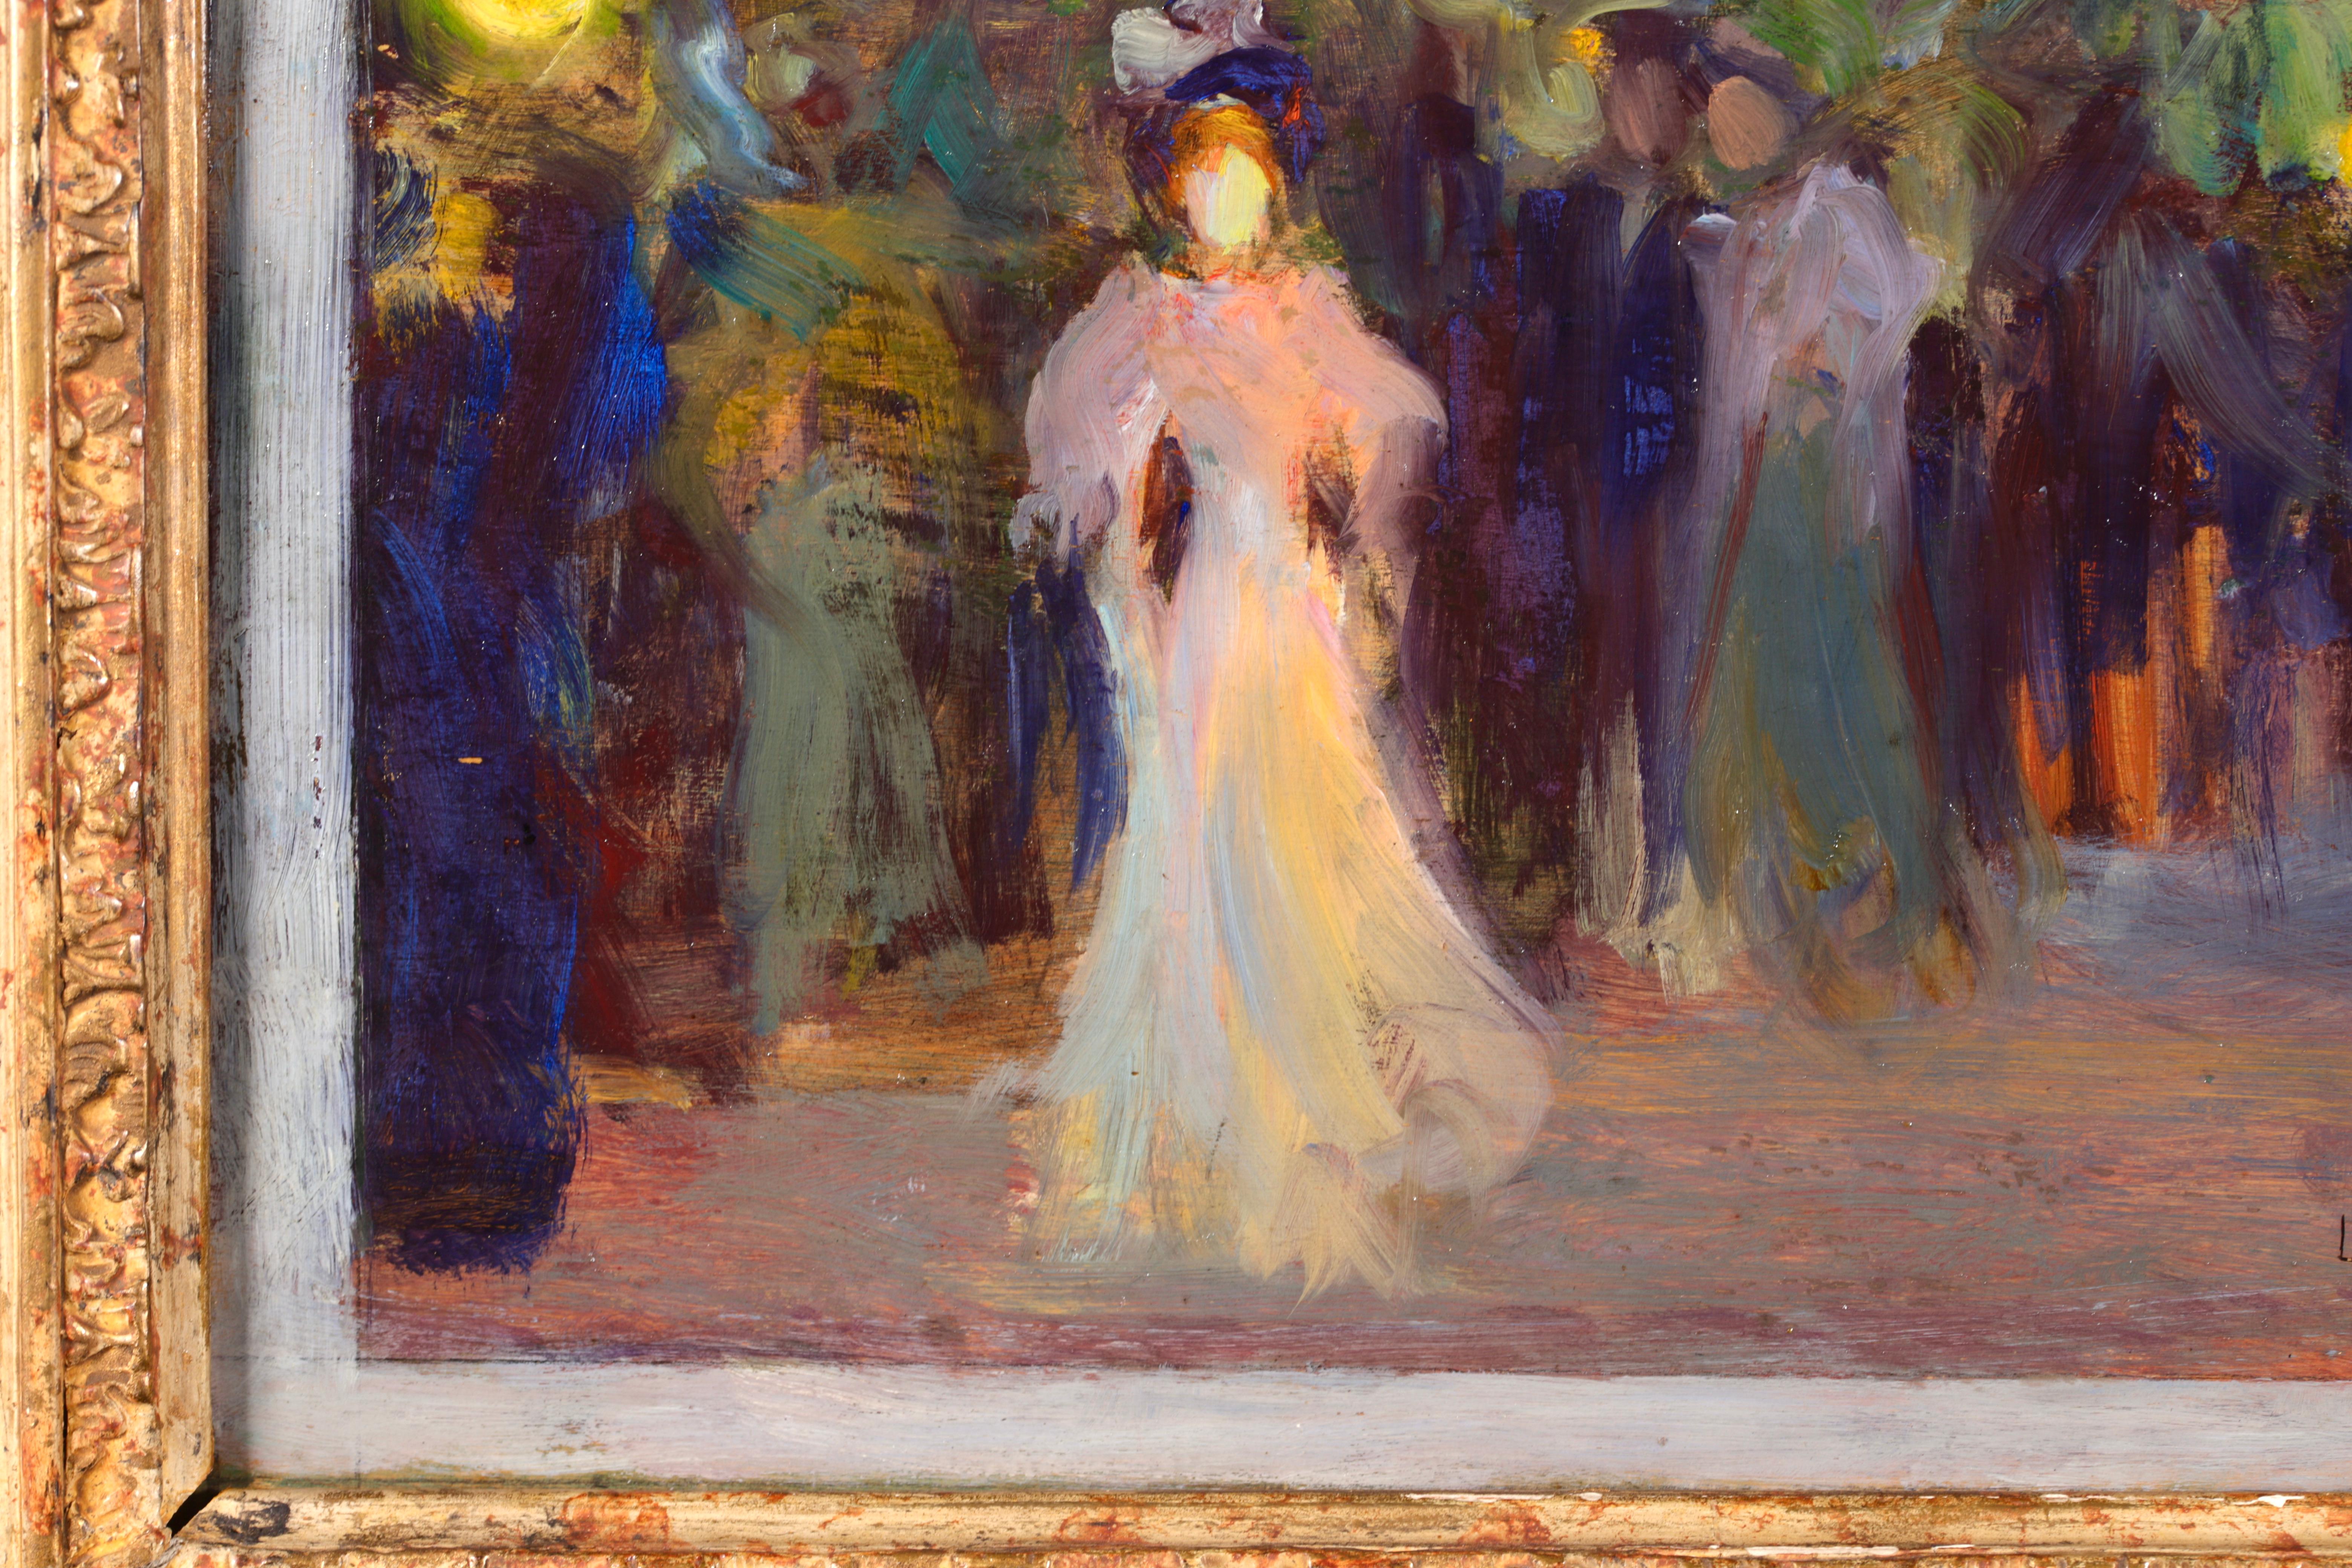 Signed post impressionist figurative oil on panel circa 1910 by sought after French painter Henri Le Sidaner. This absolutely stunning piece depicts elegant people taking an evening stroll through a park. The path is lit by the yellow glow of the